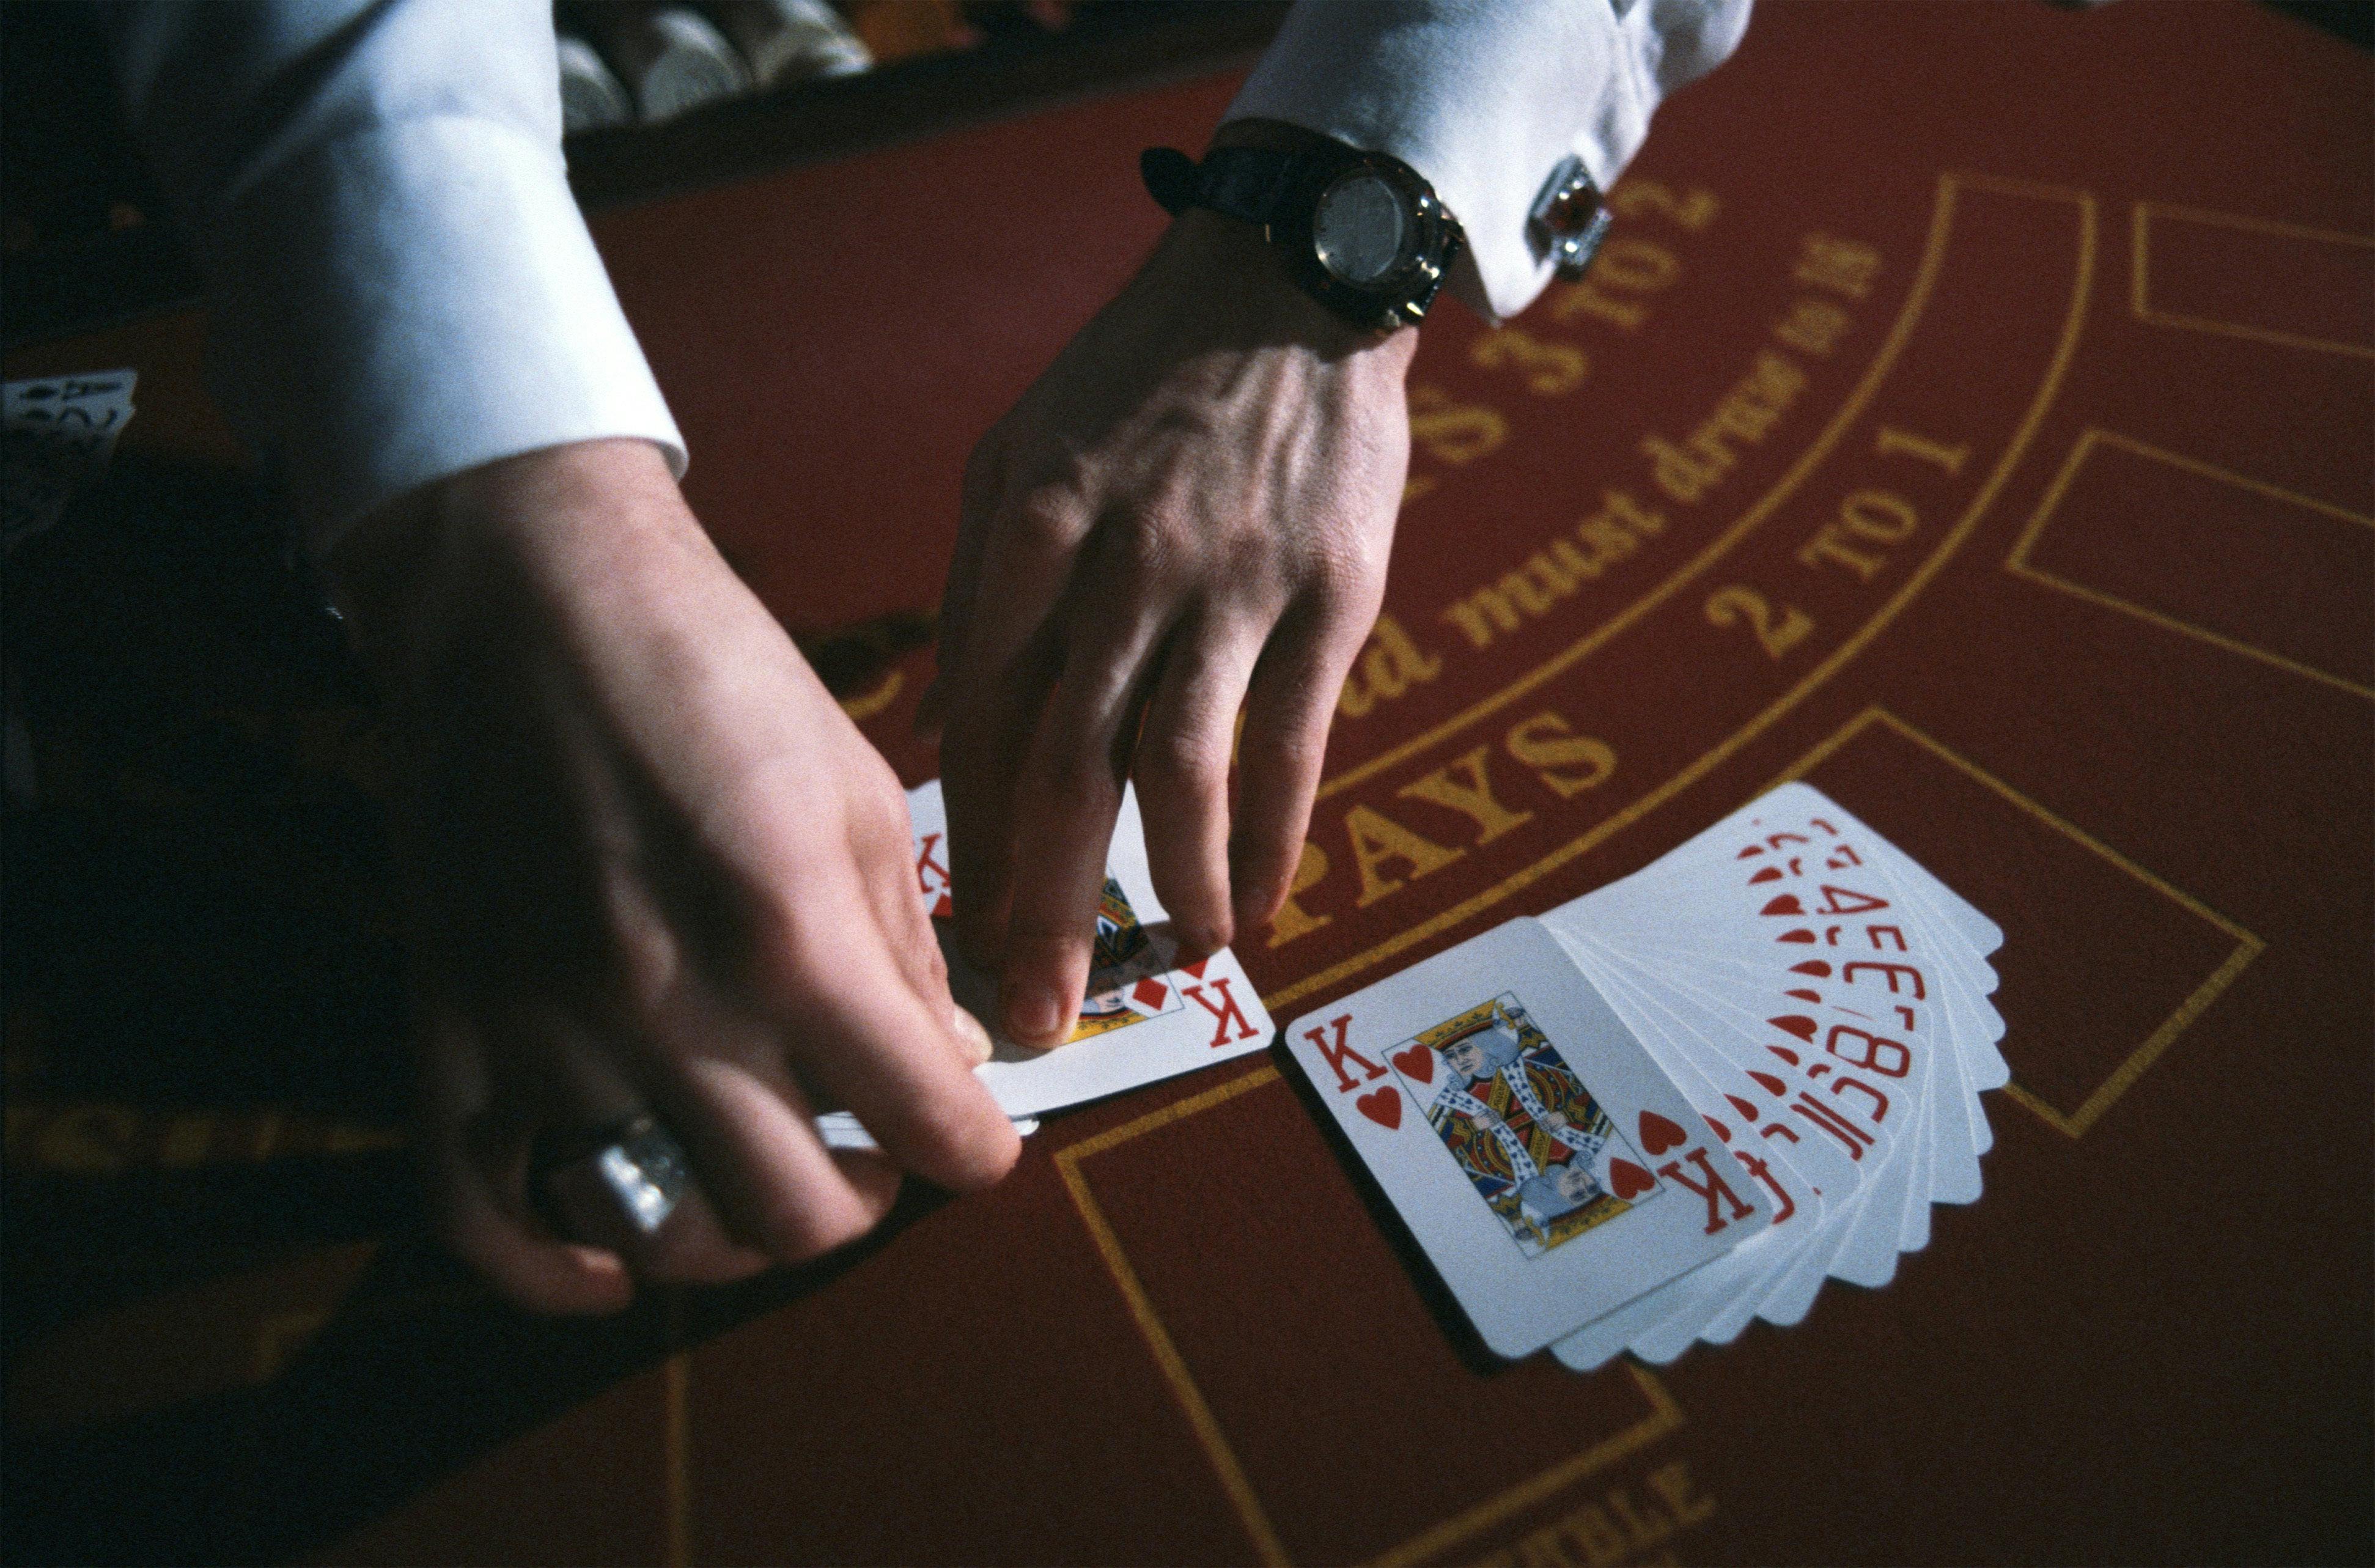 The Perfect Bet: Taking the Gambling out of Gambling